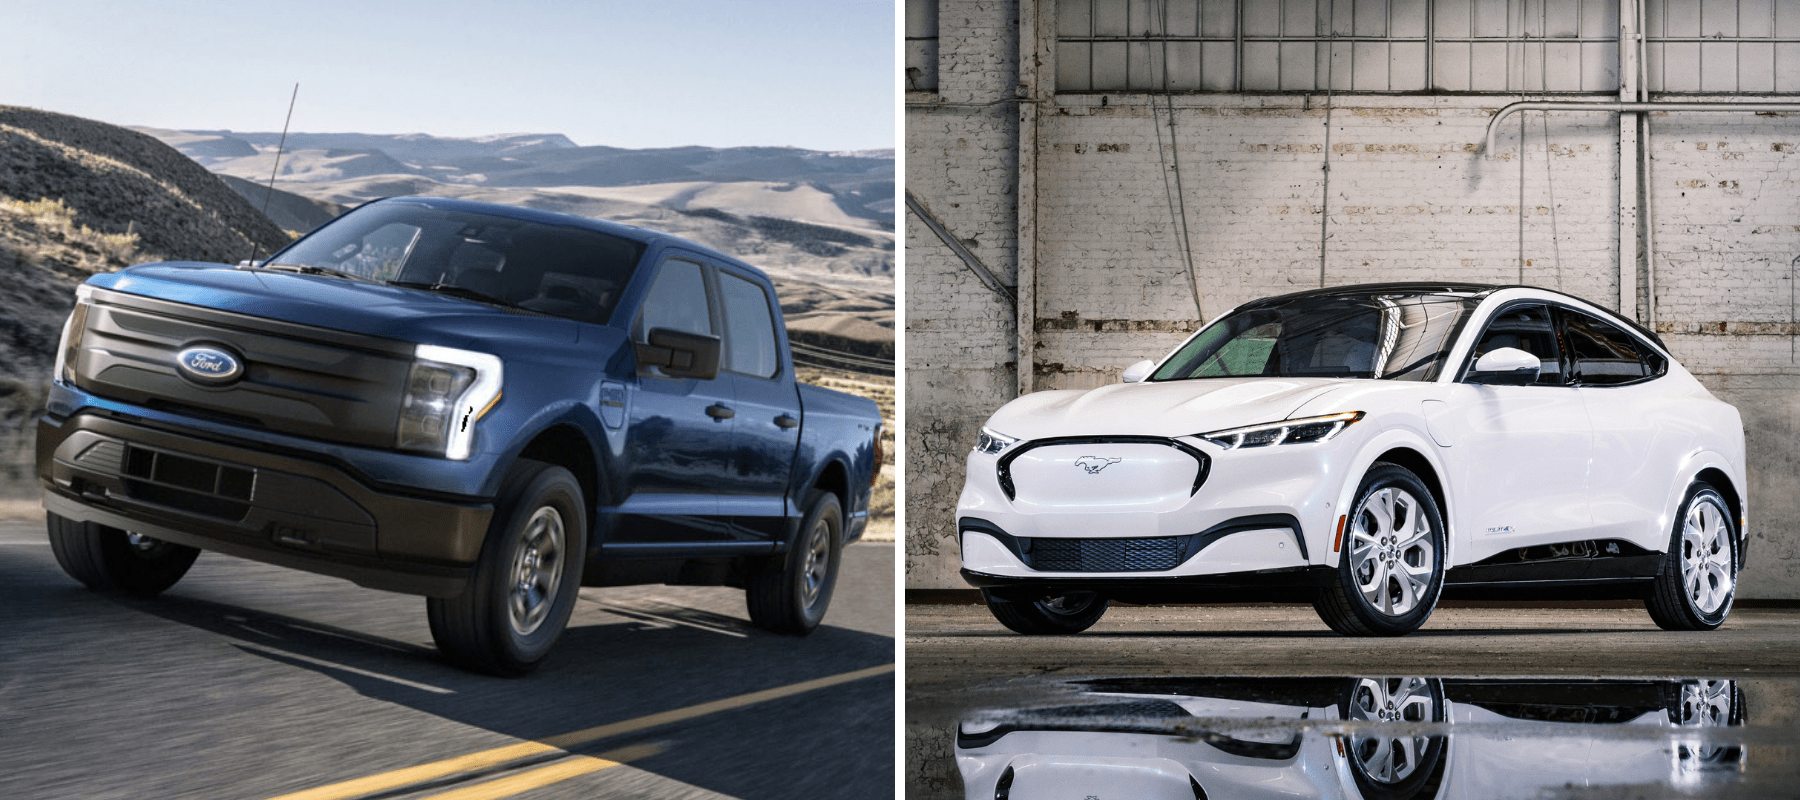 The 2022 Ford F-150 Lighting electric pickup truck and the 2022 Ford Mustang Mach-E electric muscle compact SUV